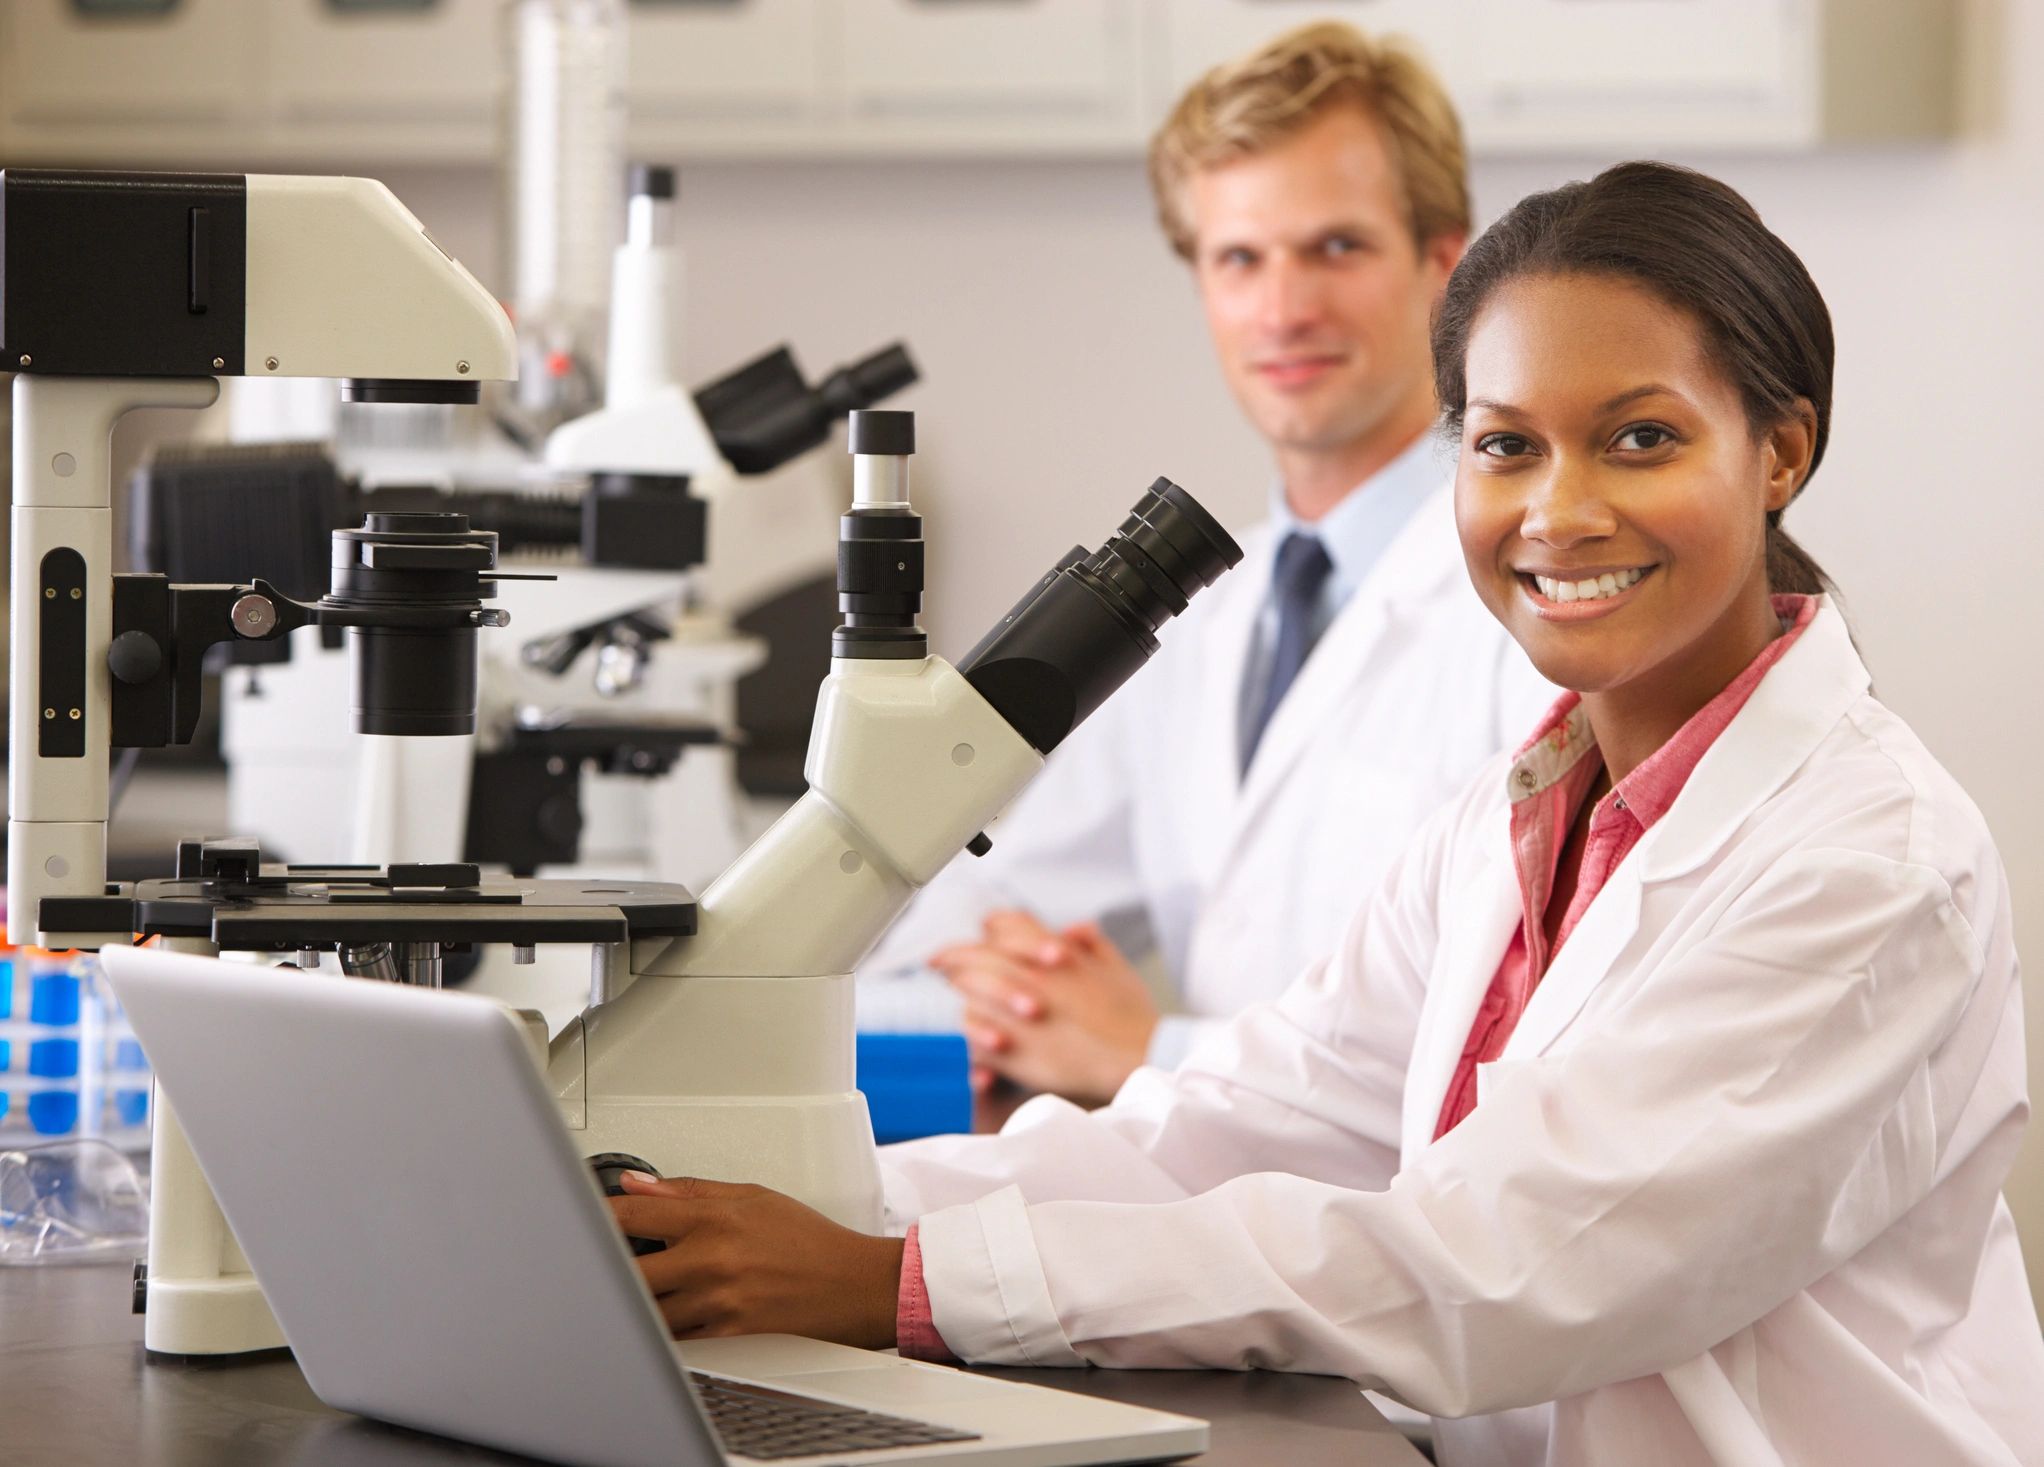 Smiling, Happy lab technicians in lab with several microscopes